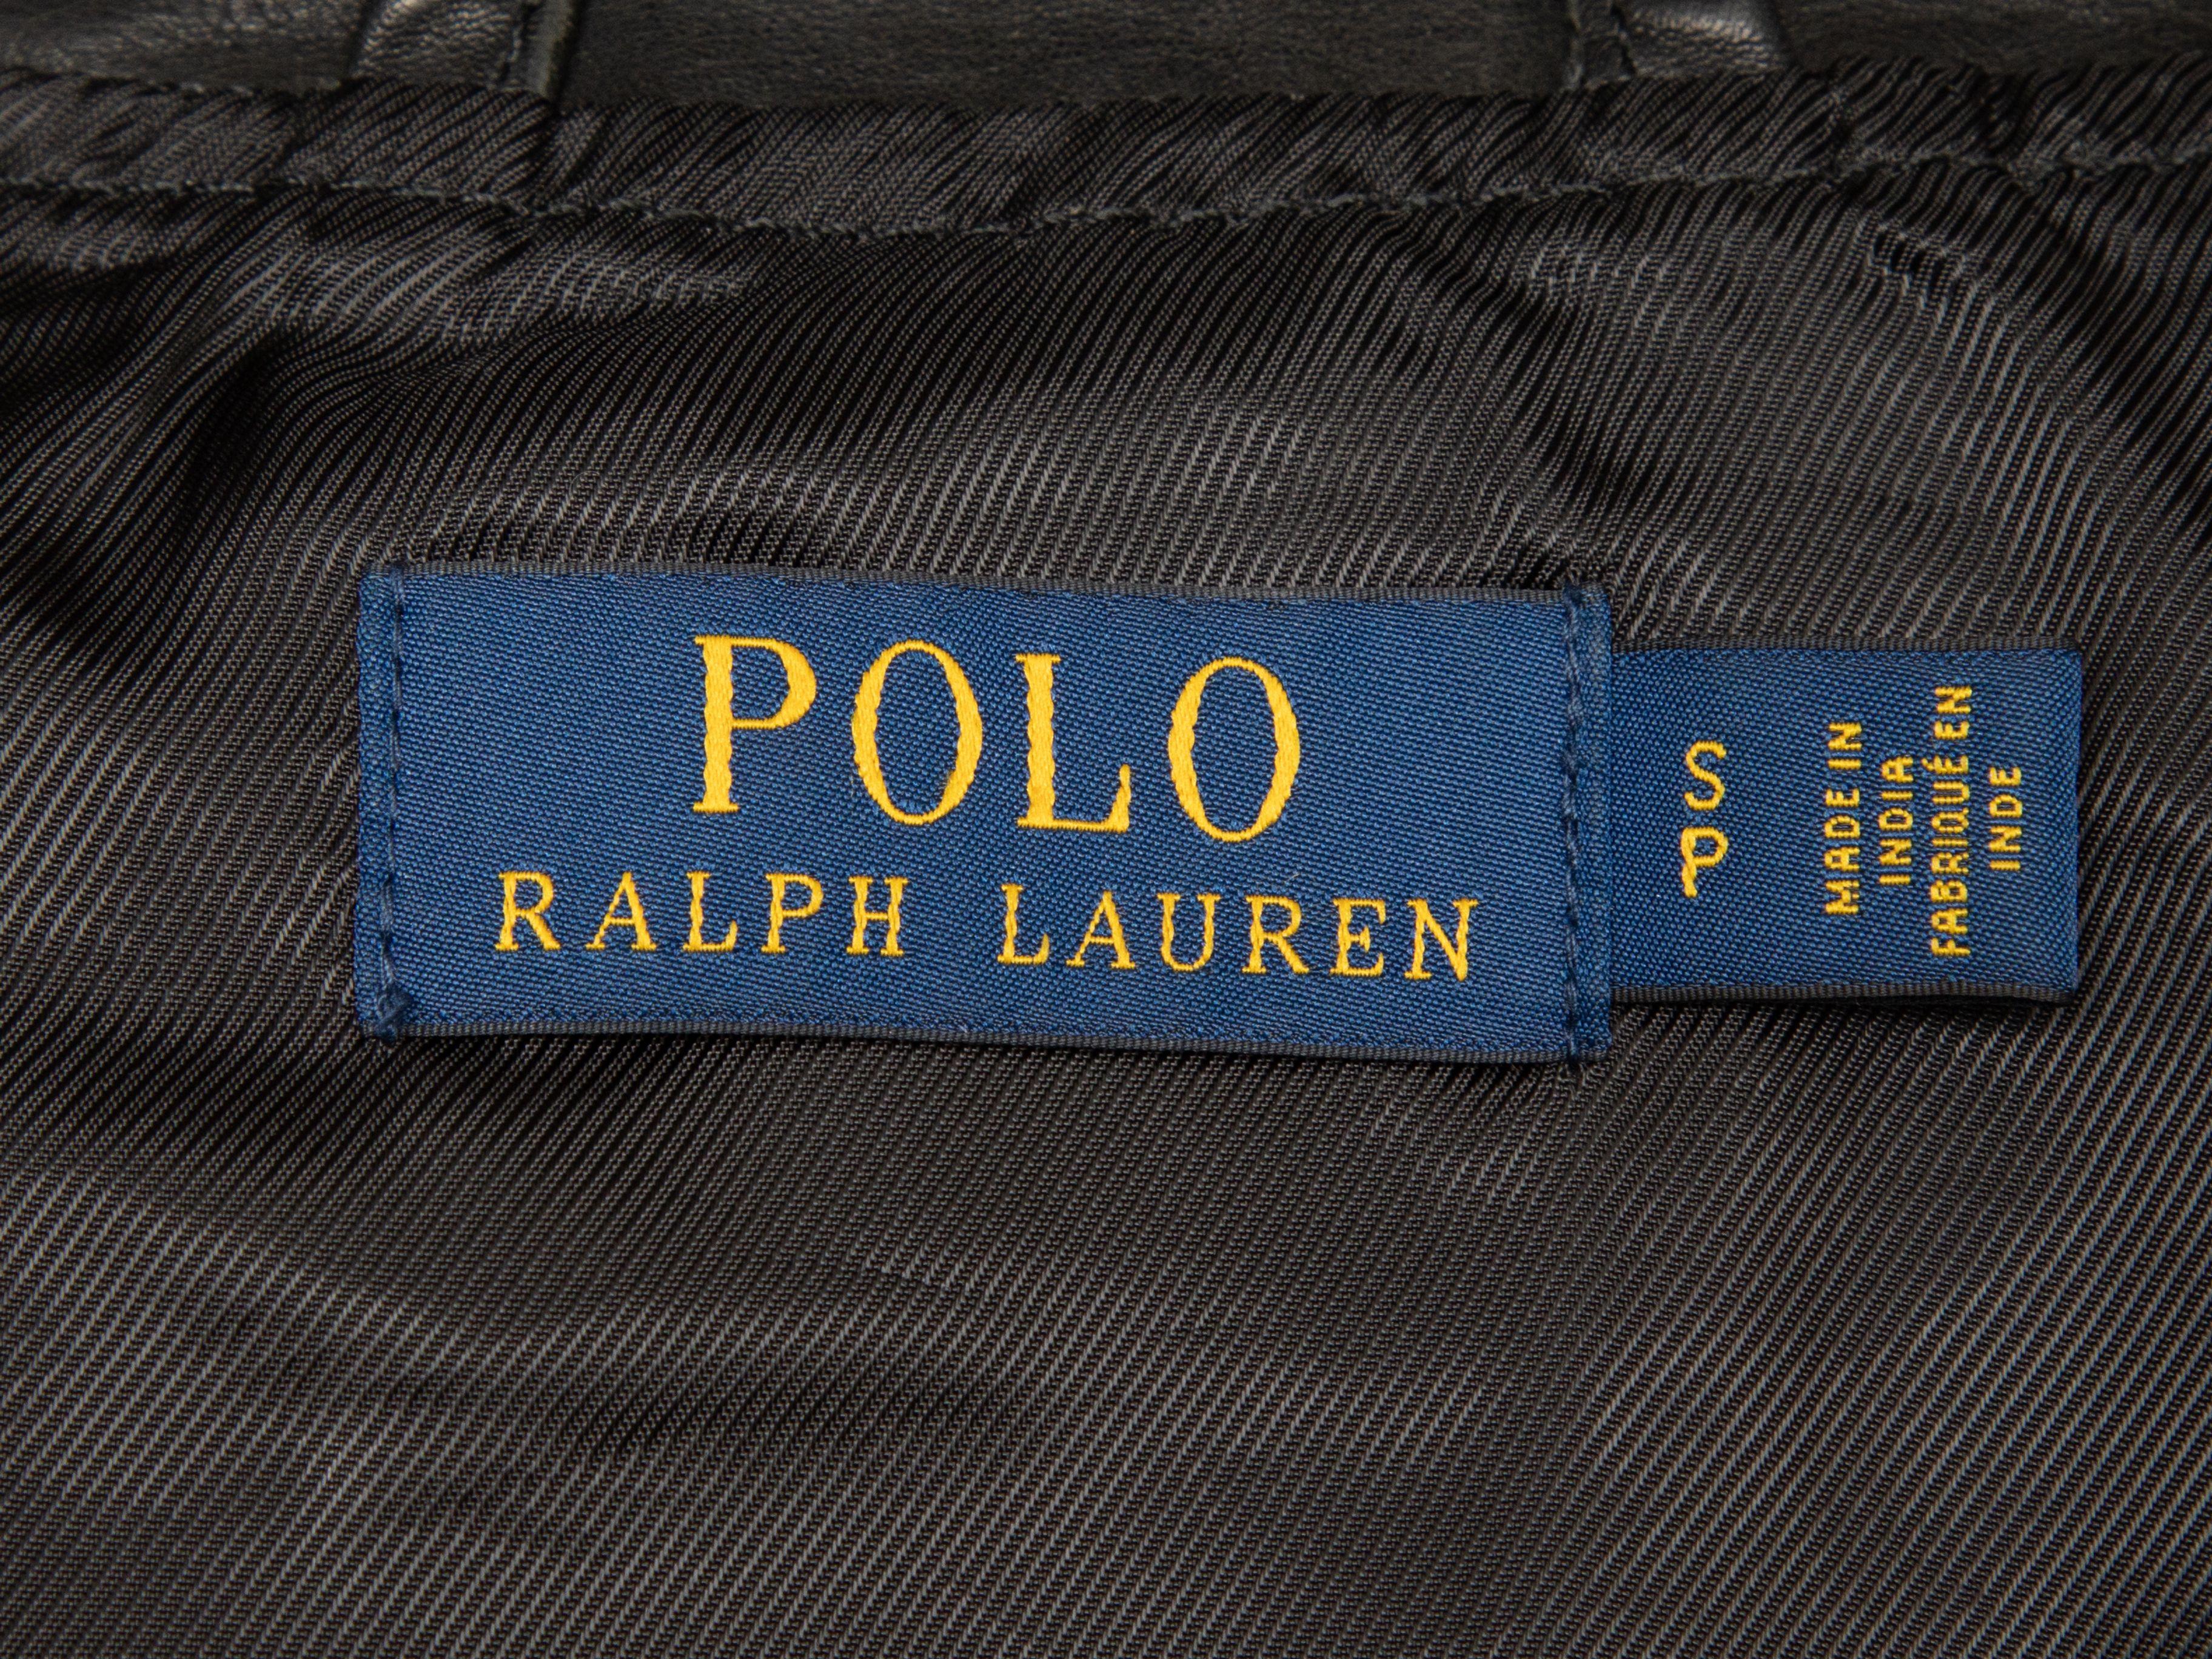 Product Details: Black leather moto jacket by Polo Ralph Lauren. Silver-tone hardware. Stand collar. Belt at waist. Front snap and zip closures. 34